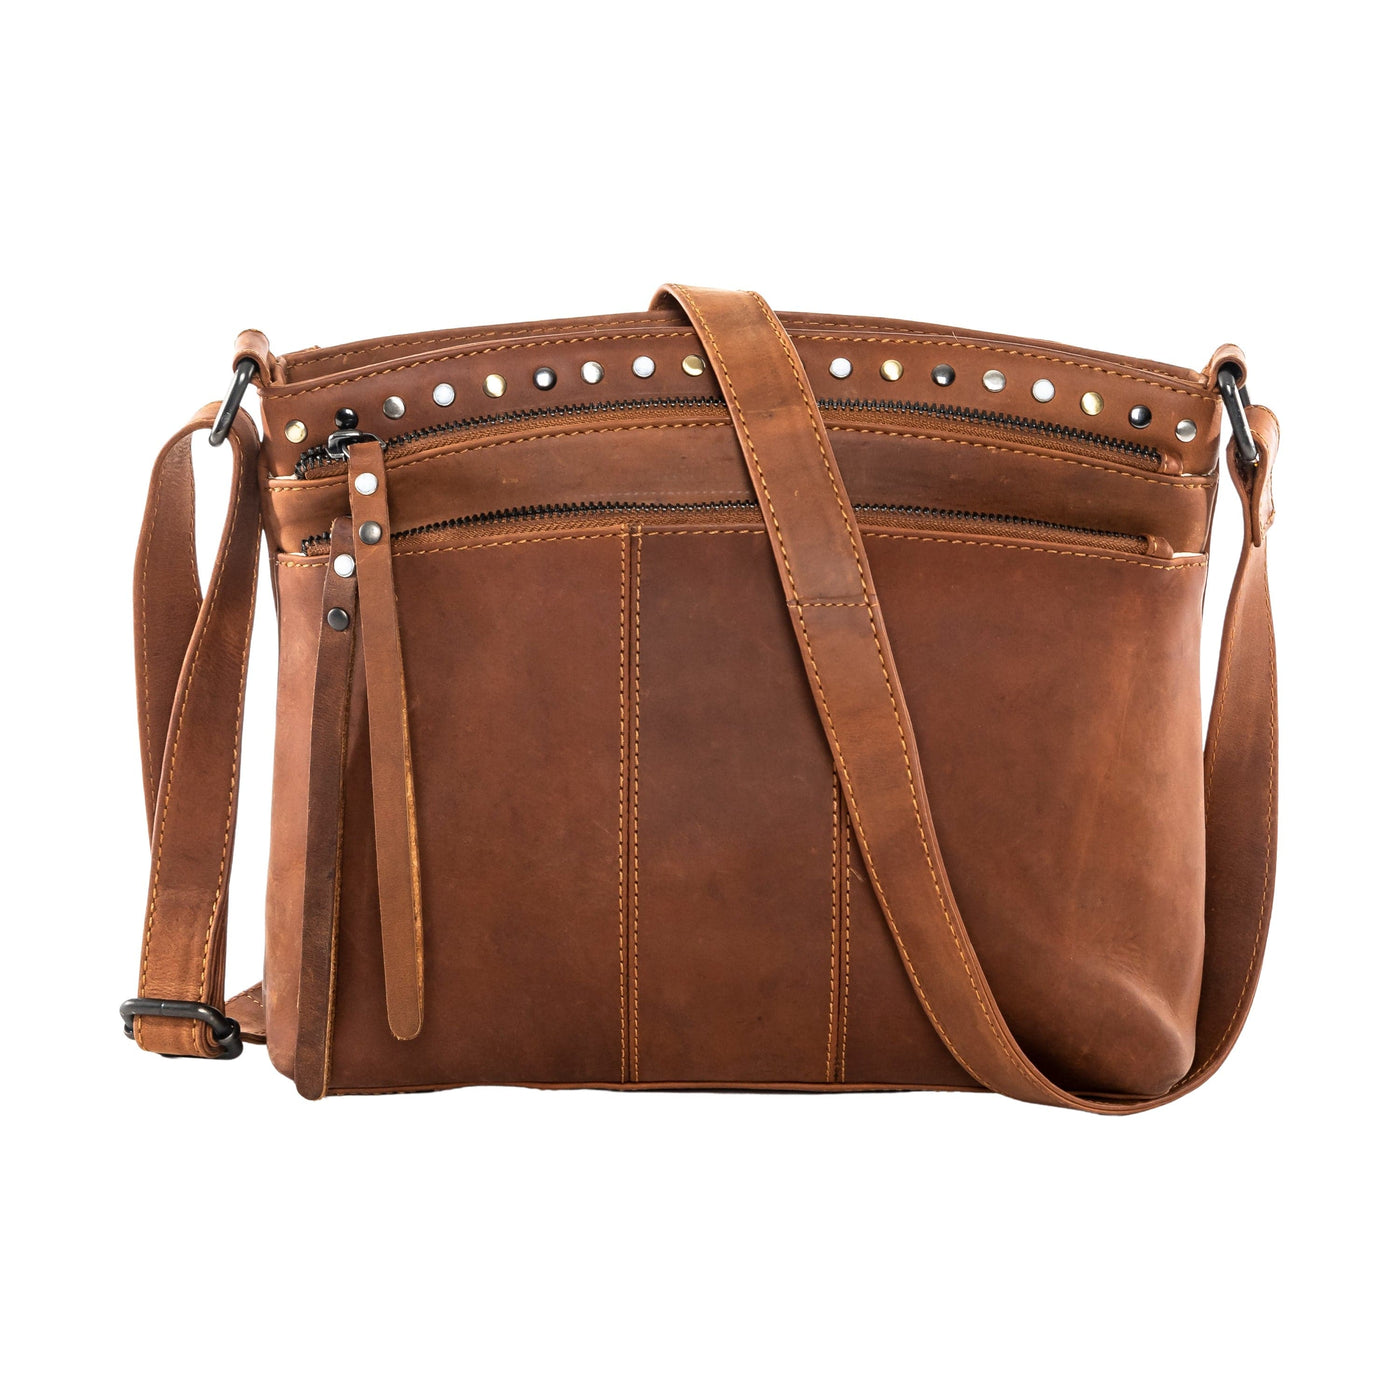 Concealed Carry Brynn Arched Leather Crossbody Bag - Lady Conceal - Concealed Carry Purse - Lady Conceal - conceal and cary purse for women - tactical pistol bag -  Locking Conceal and Carry Purse with Universal Holster for Handguns